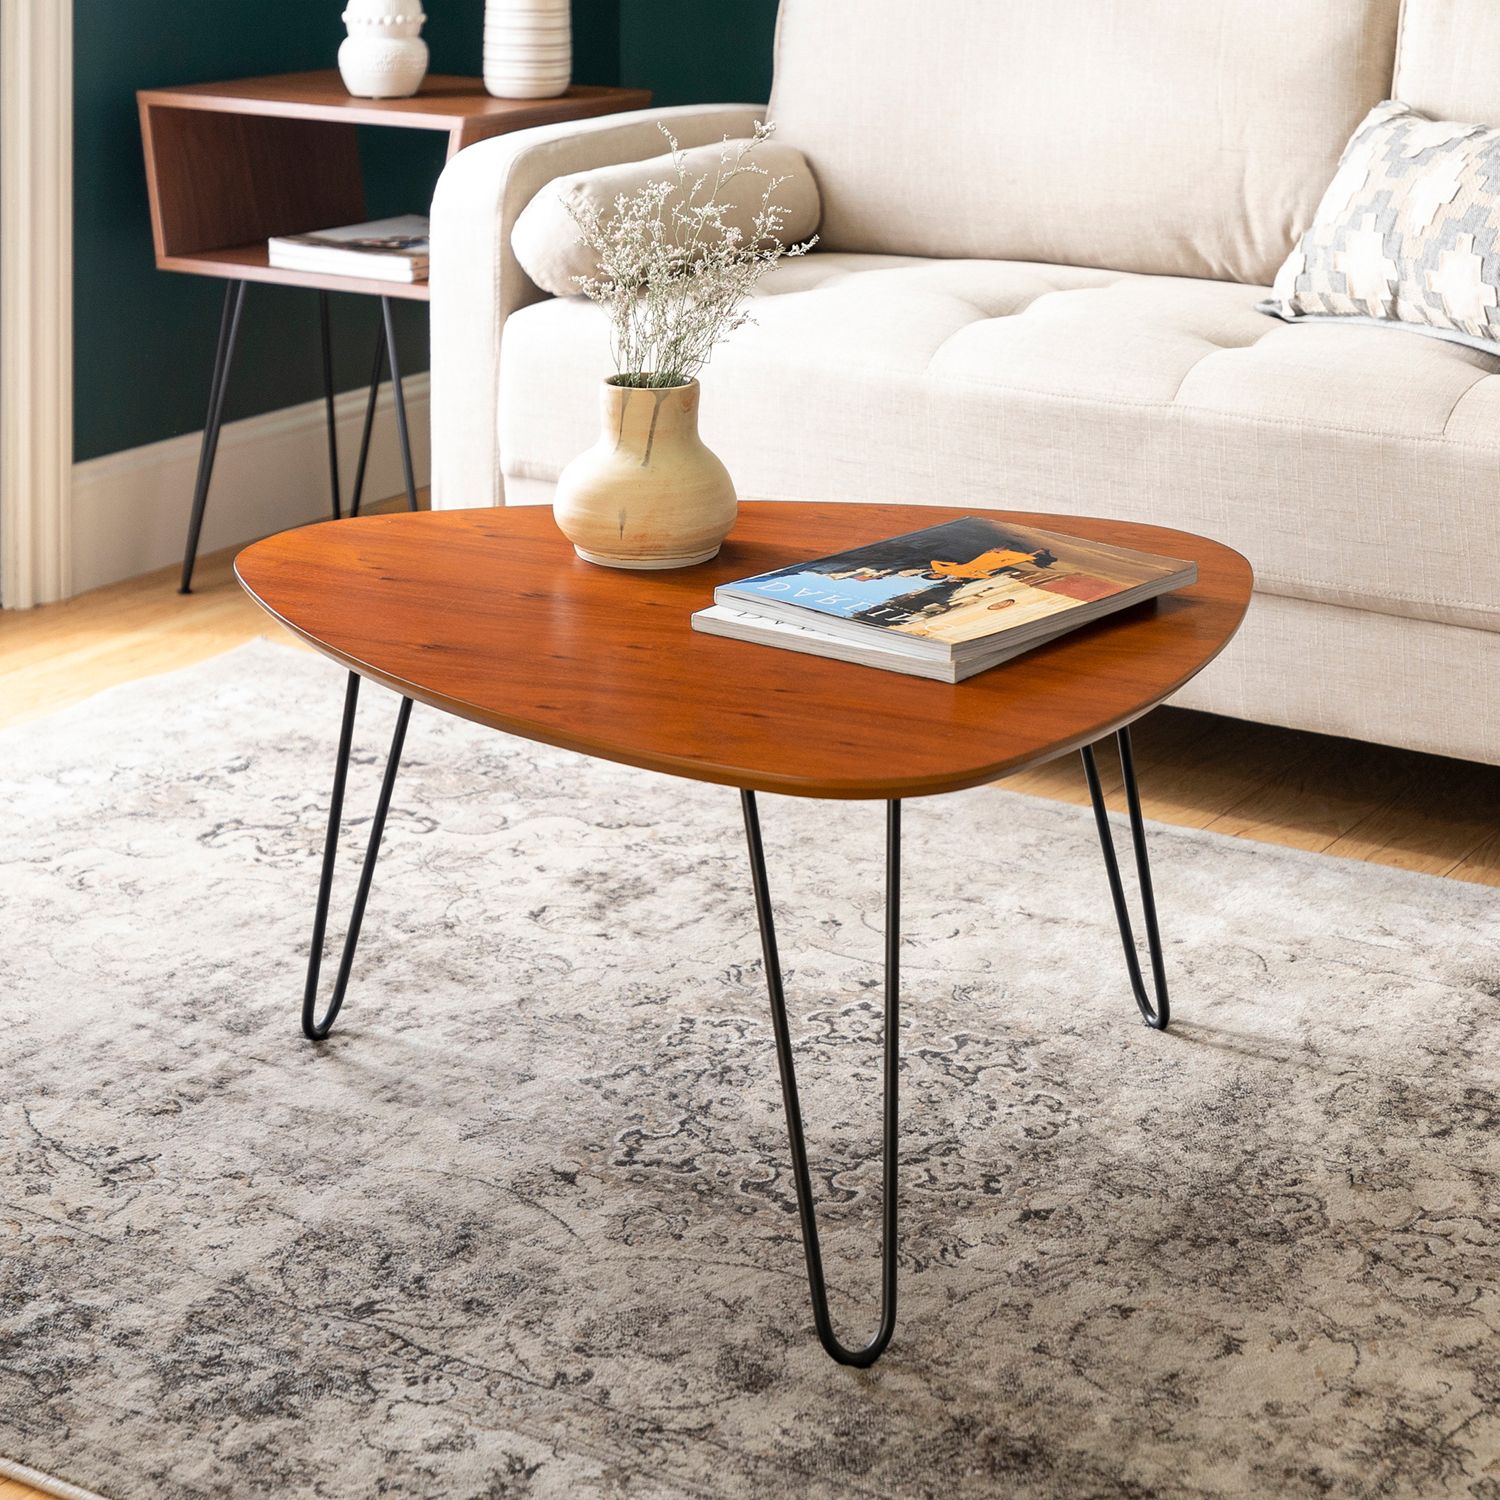 Most Popular Walnut Coffee Tables Throughout Walnut Hairpin Leg Wood Coffee Table – Pier1 (Gallery 4 of 20)